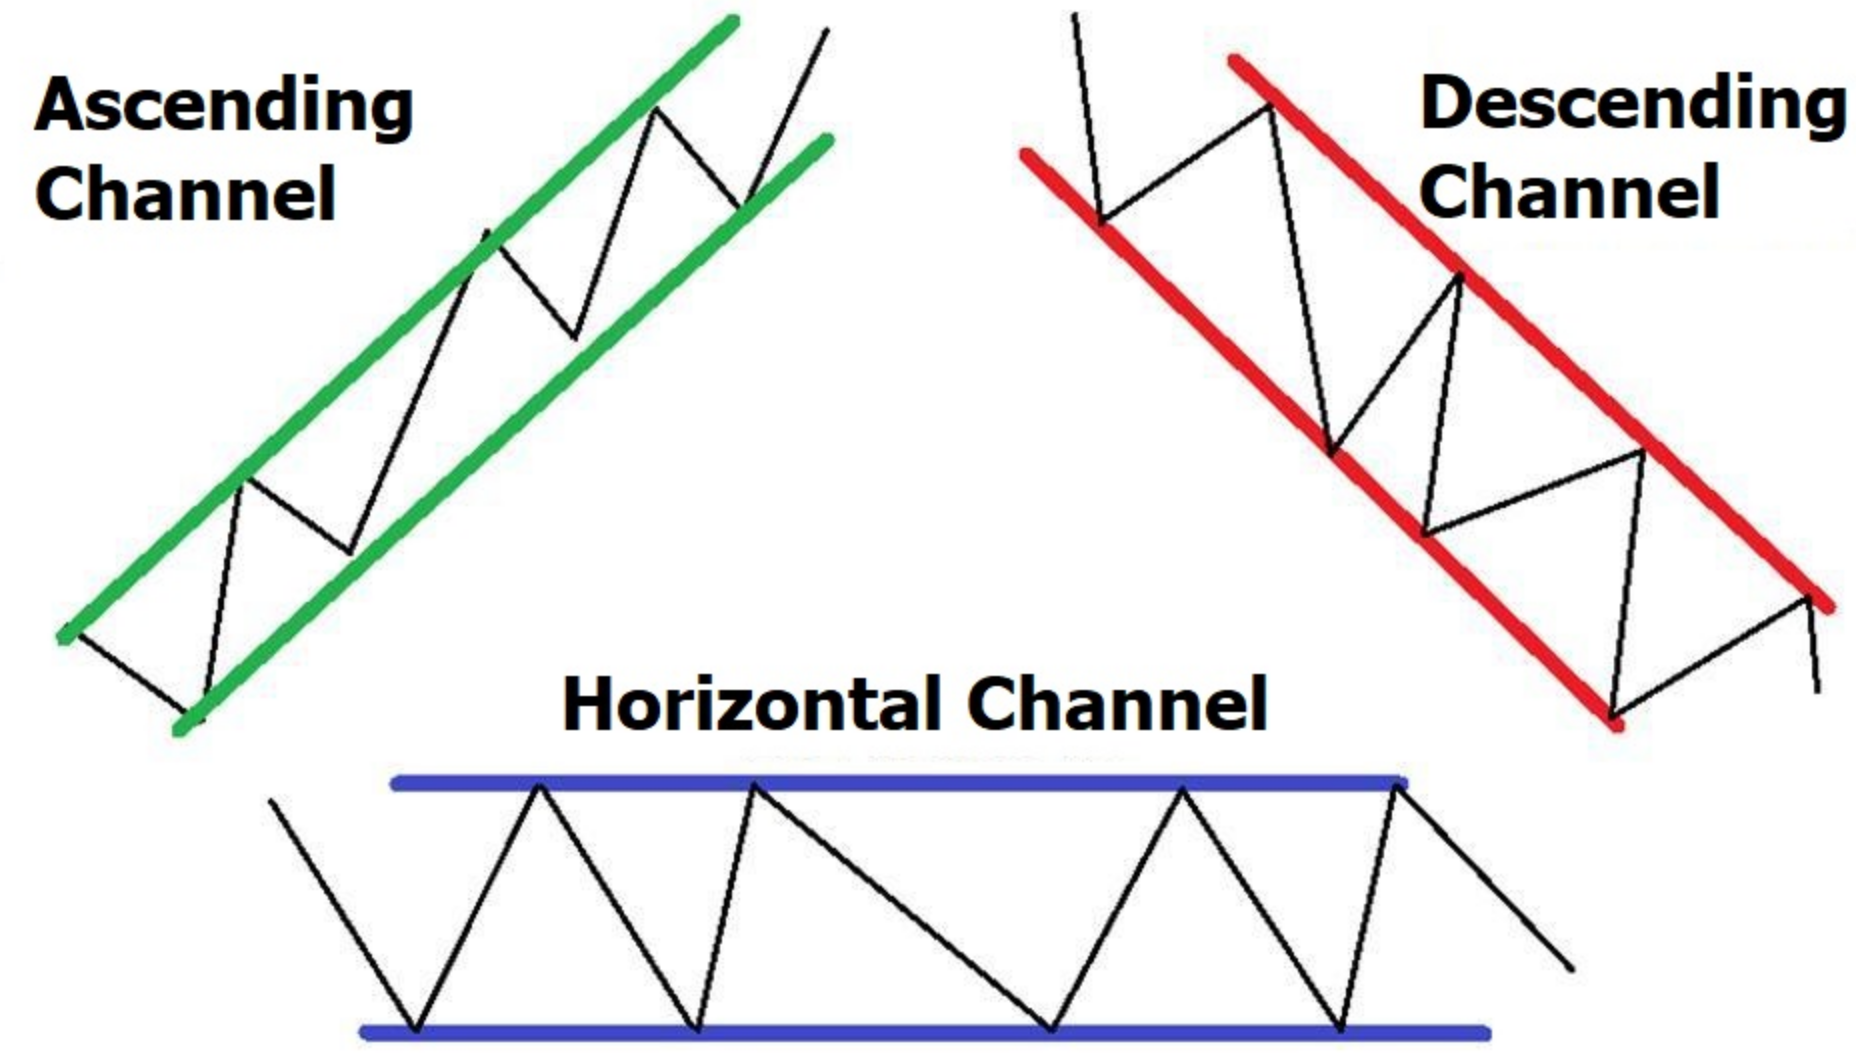 Trading Strategies Using Ascending Channel Pattern